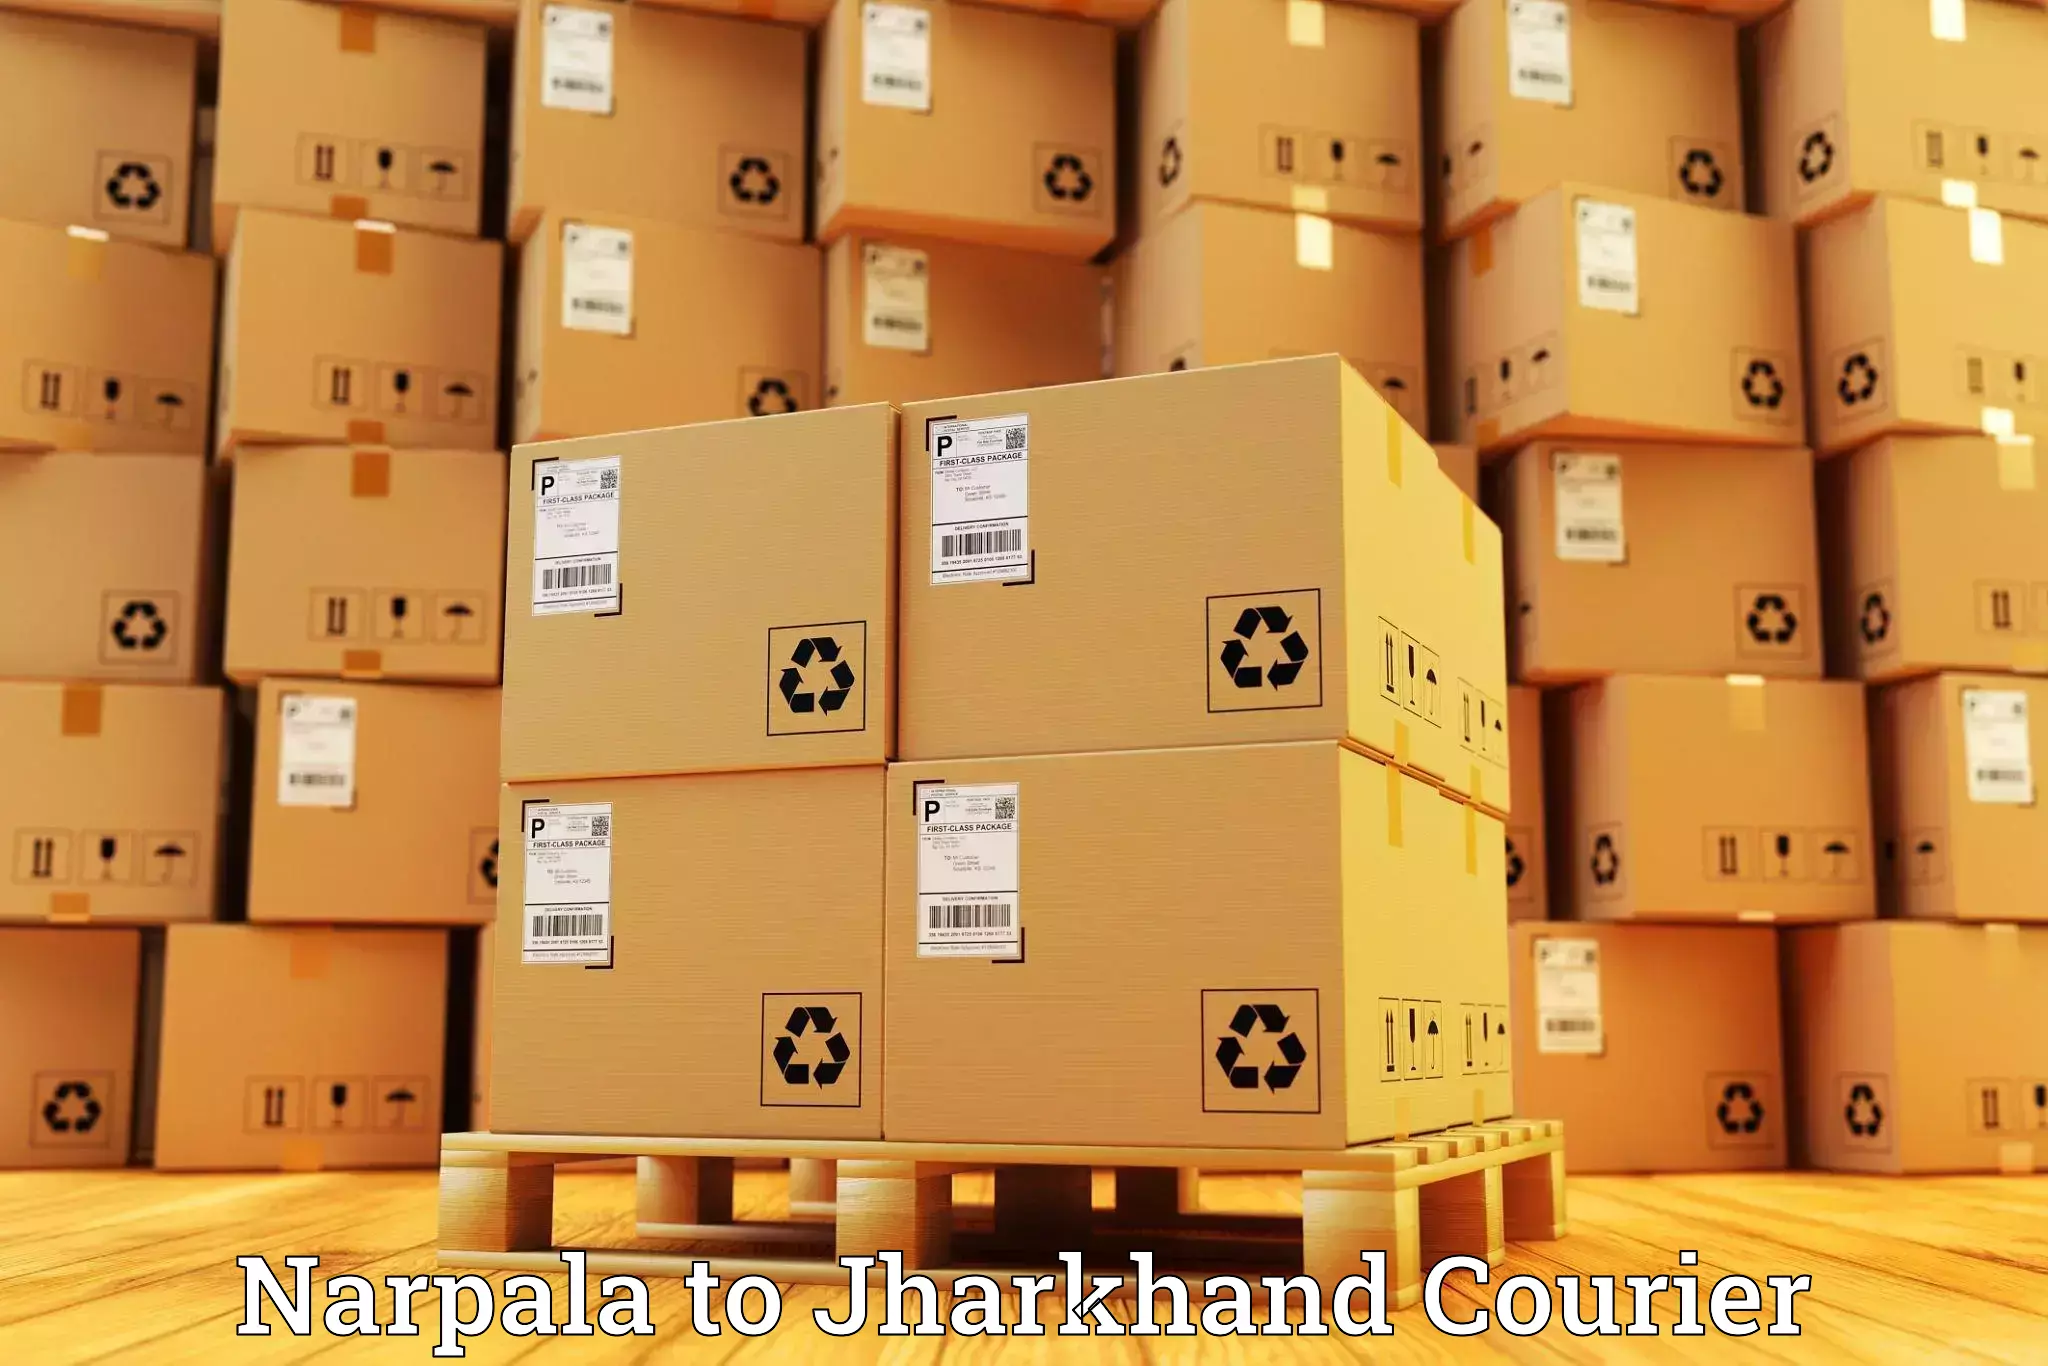 Courier service comparison Narpala to Jharkhand